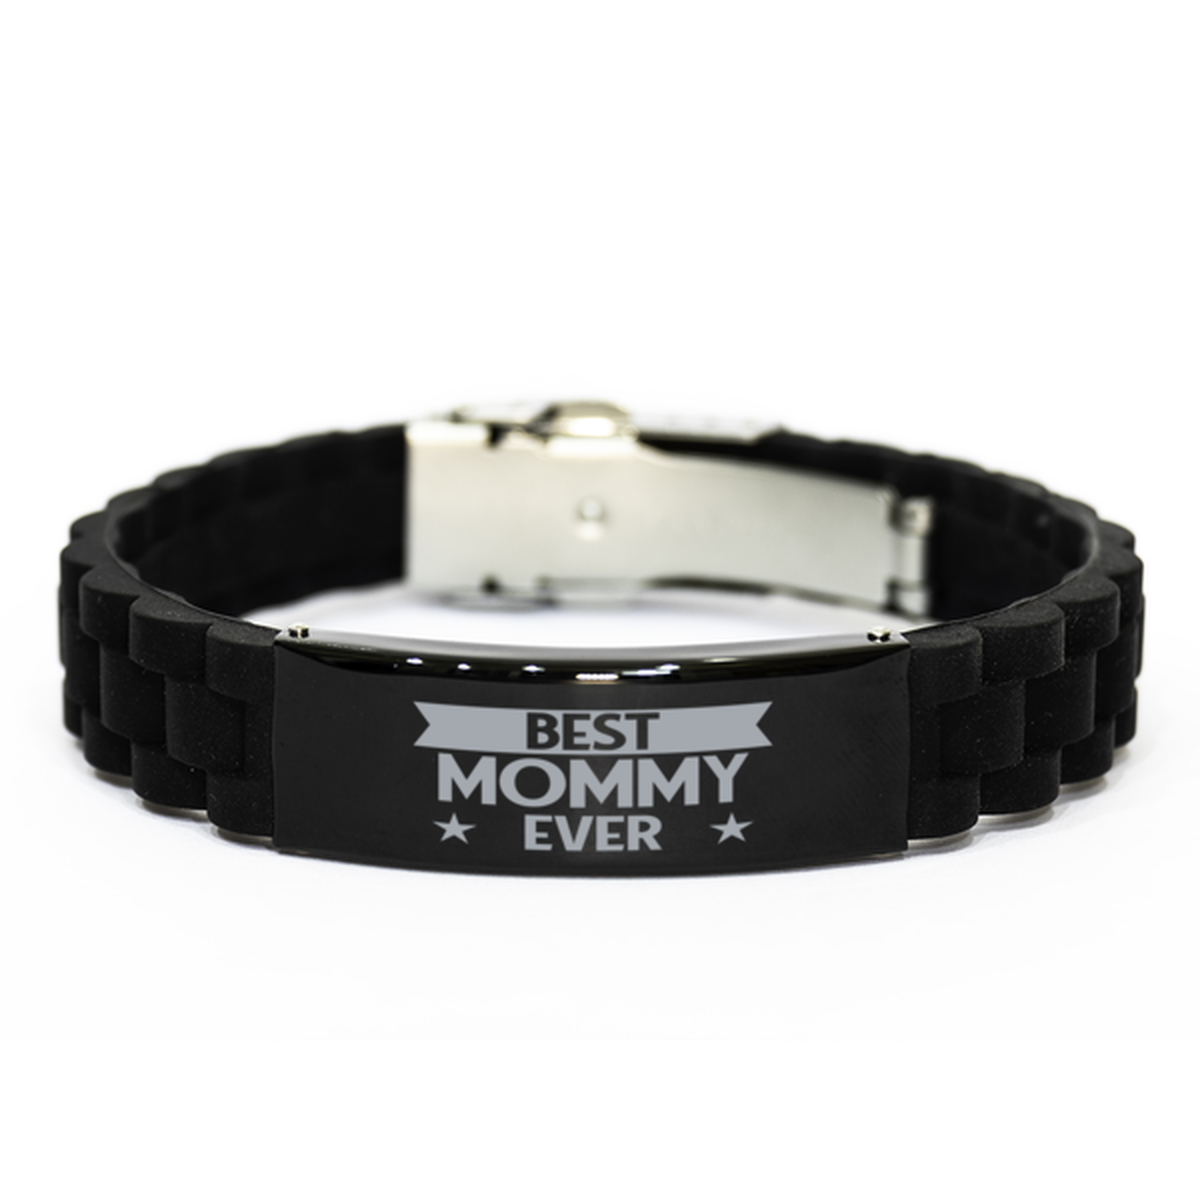 Best Mommy Ever Mommy Gifts, Funny Black Engraved Bracelet For Mommy, Family Gifts For Women